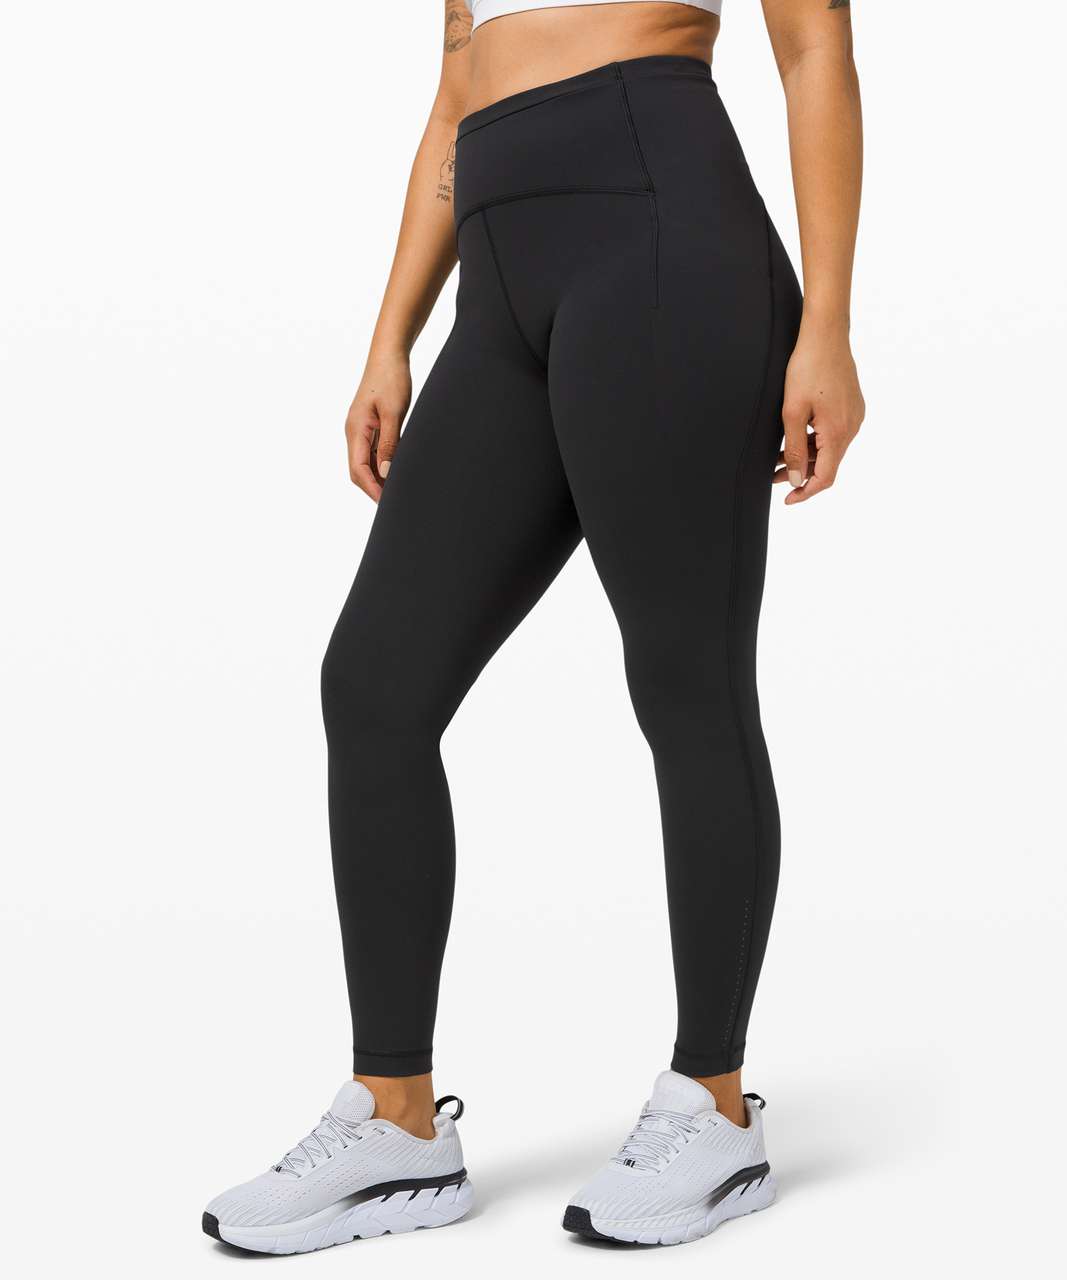 Lululemon Swift Speed High-Rise Tight 28" - Black (First Release)